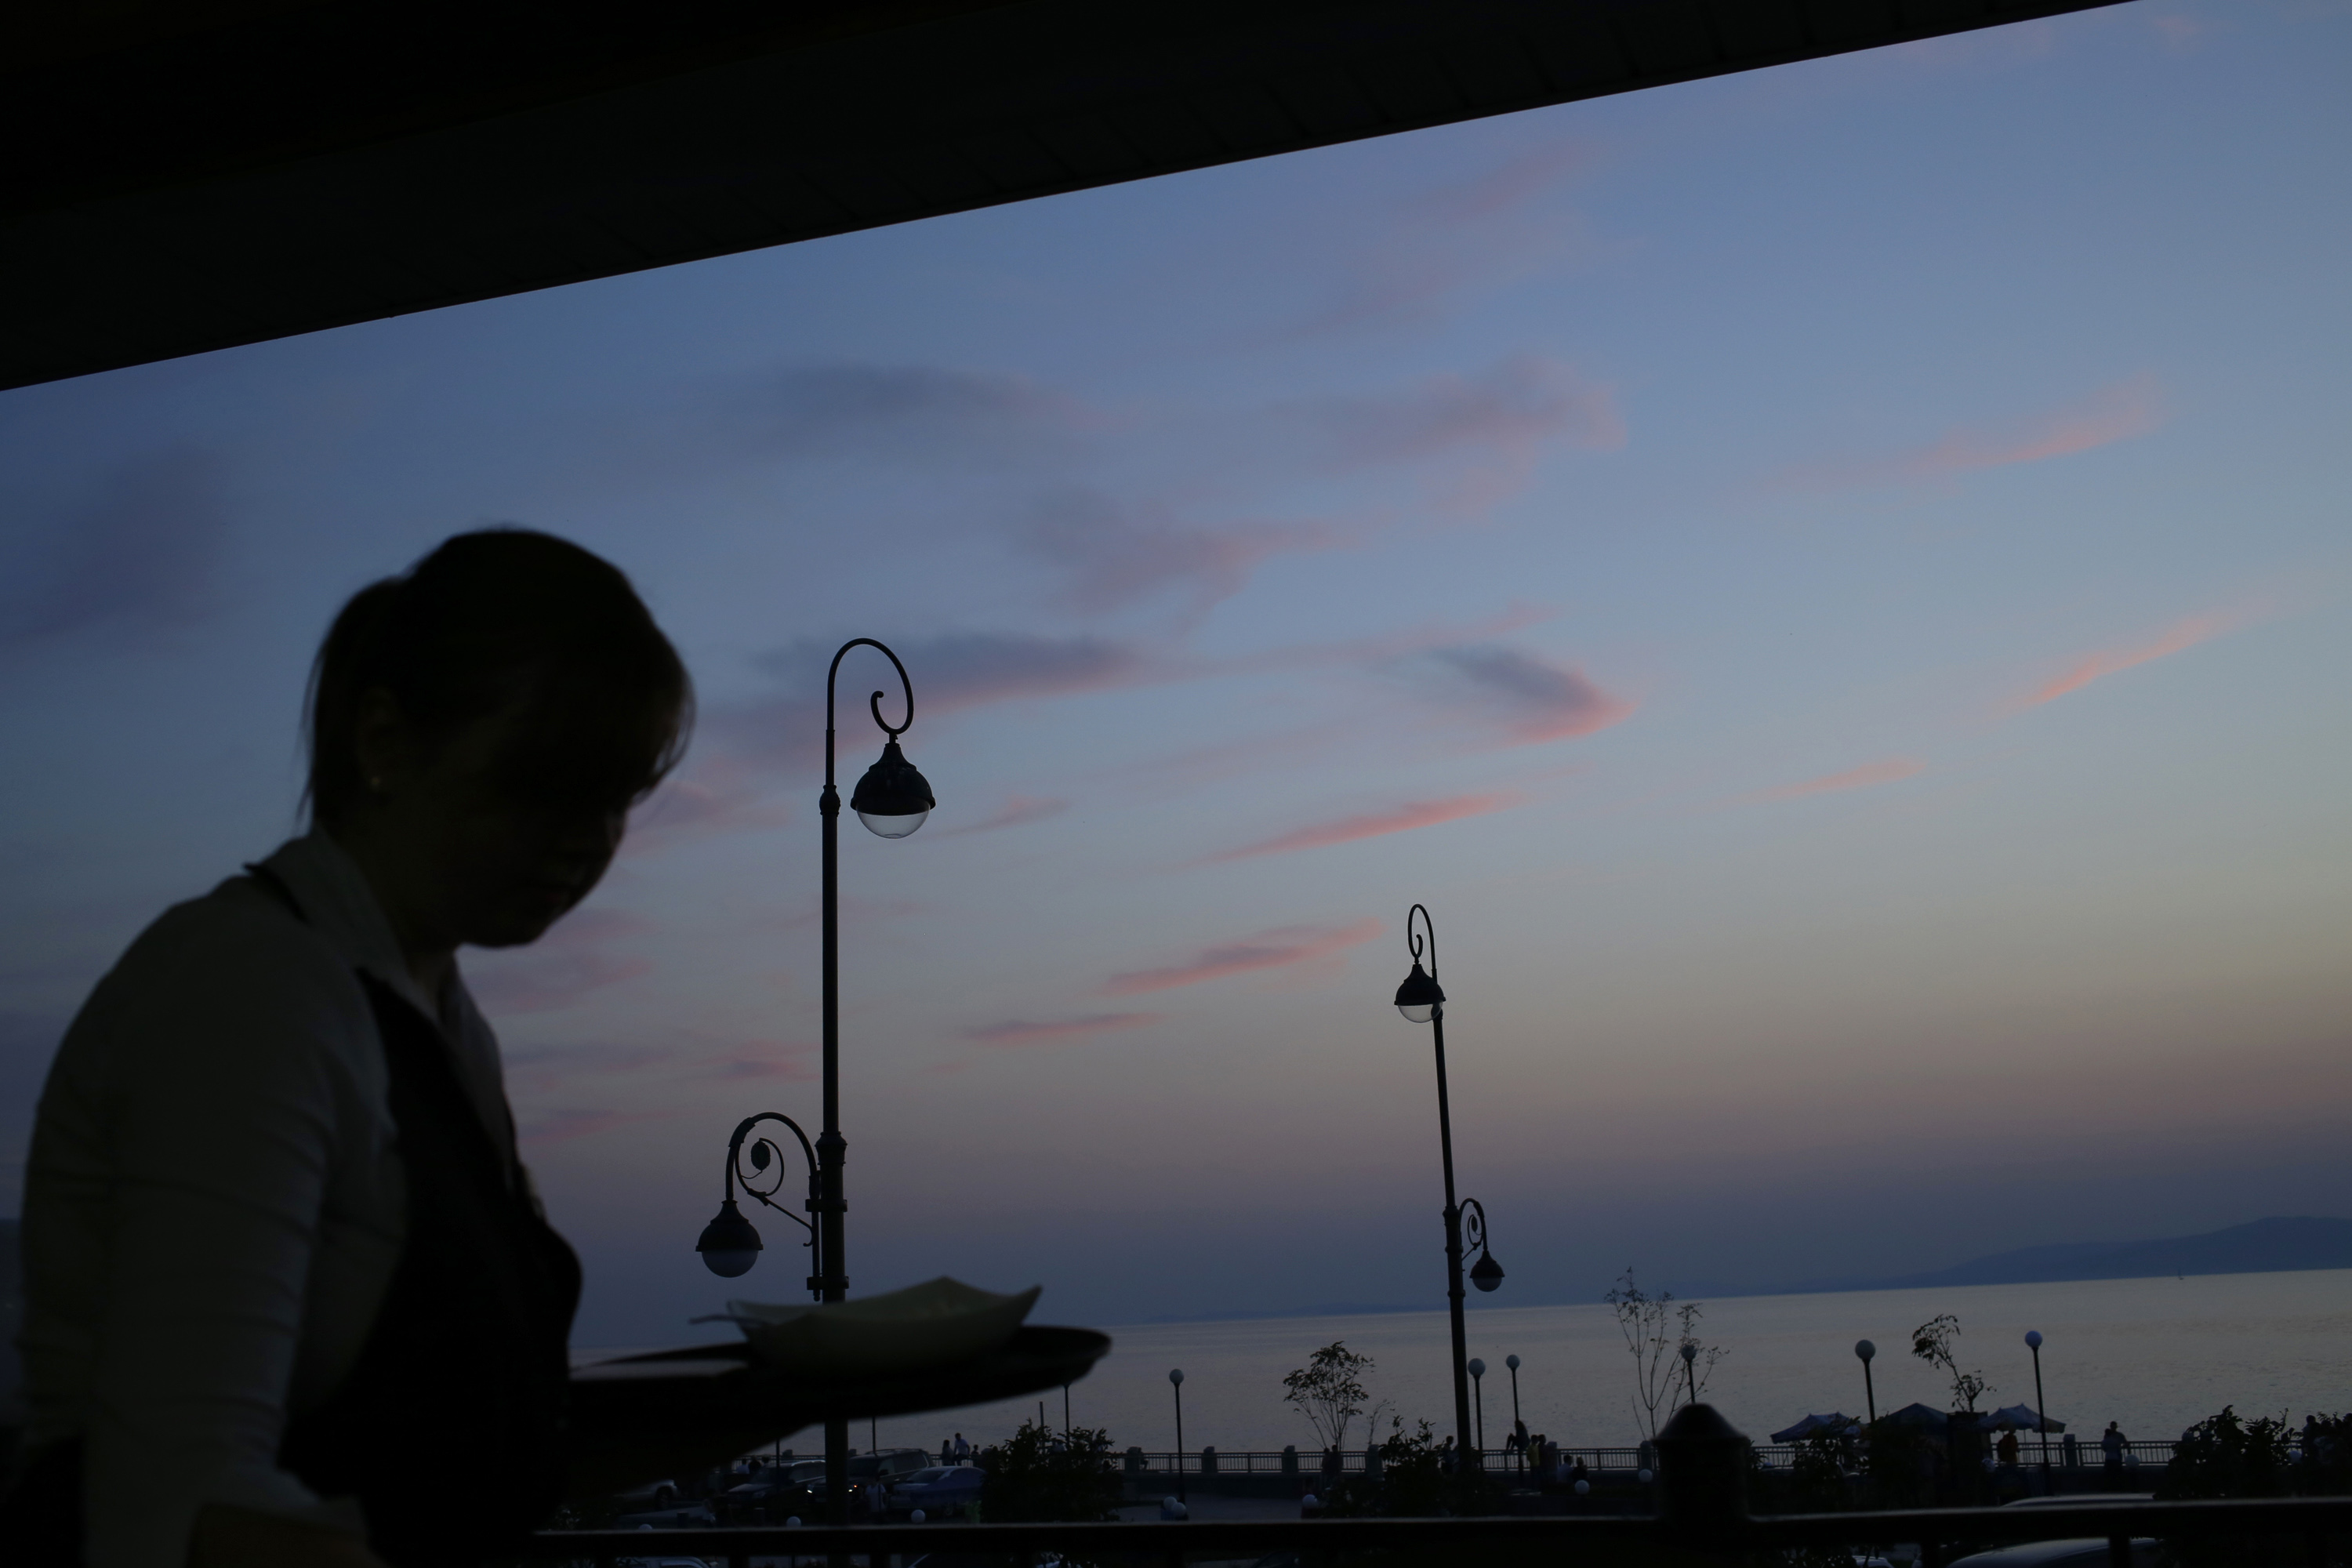 A waitress cleans a table against sunset at a restaurant in the eastern Russian city of Vladivostok, Monday, Sept. 10, 2012. (AP Photo/Vincent Yu)